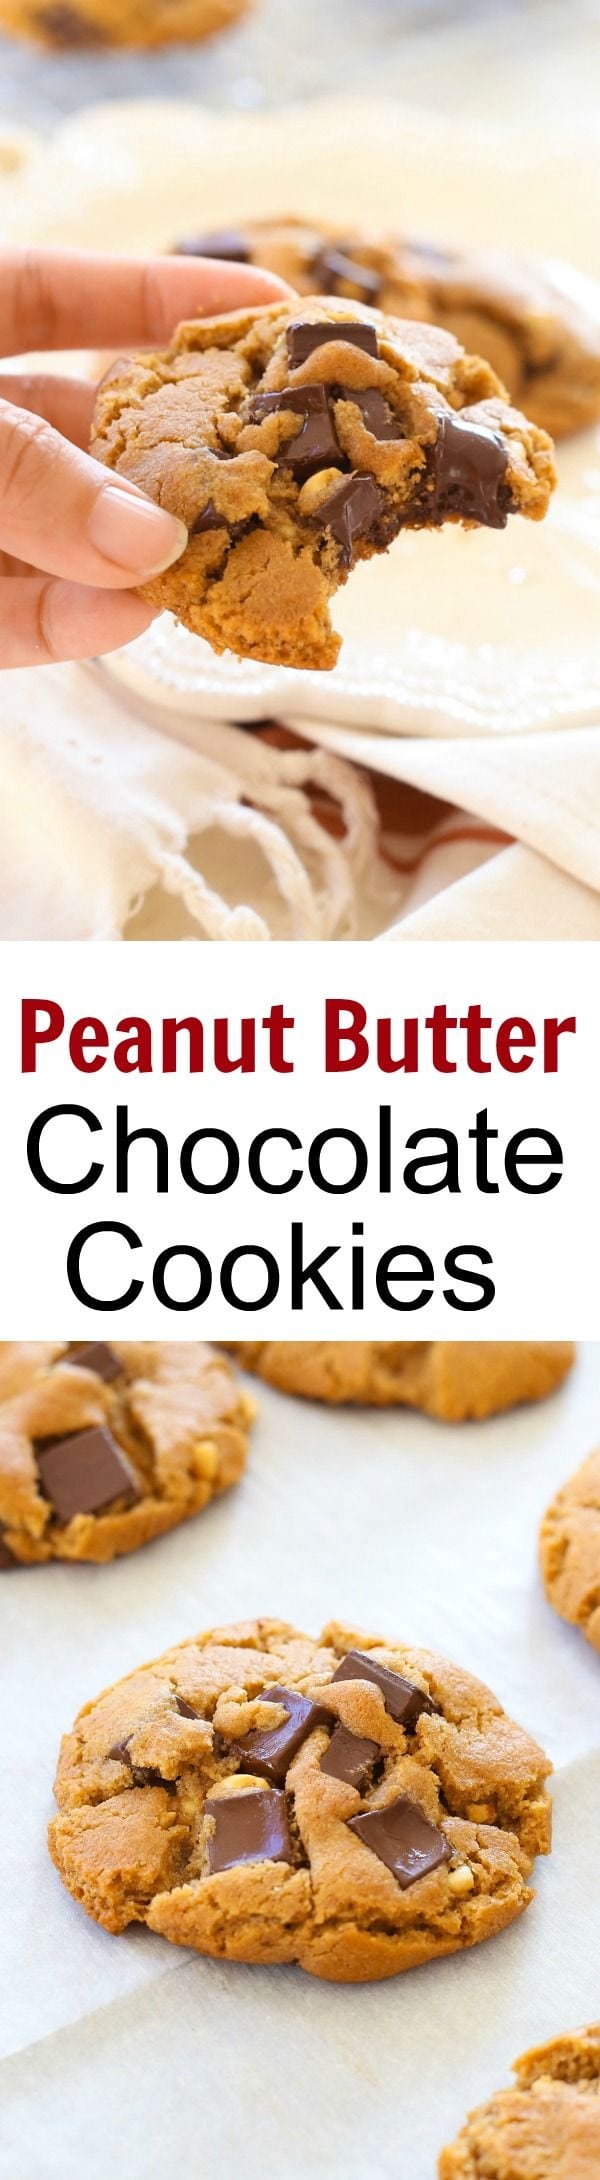 Peanut Butter Dark Chocolate Cookies – buttery cookies loaded with chocolate and peanut butter. So delicious you can't stop eating | rasamalaysia.com